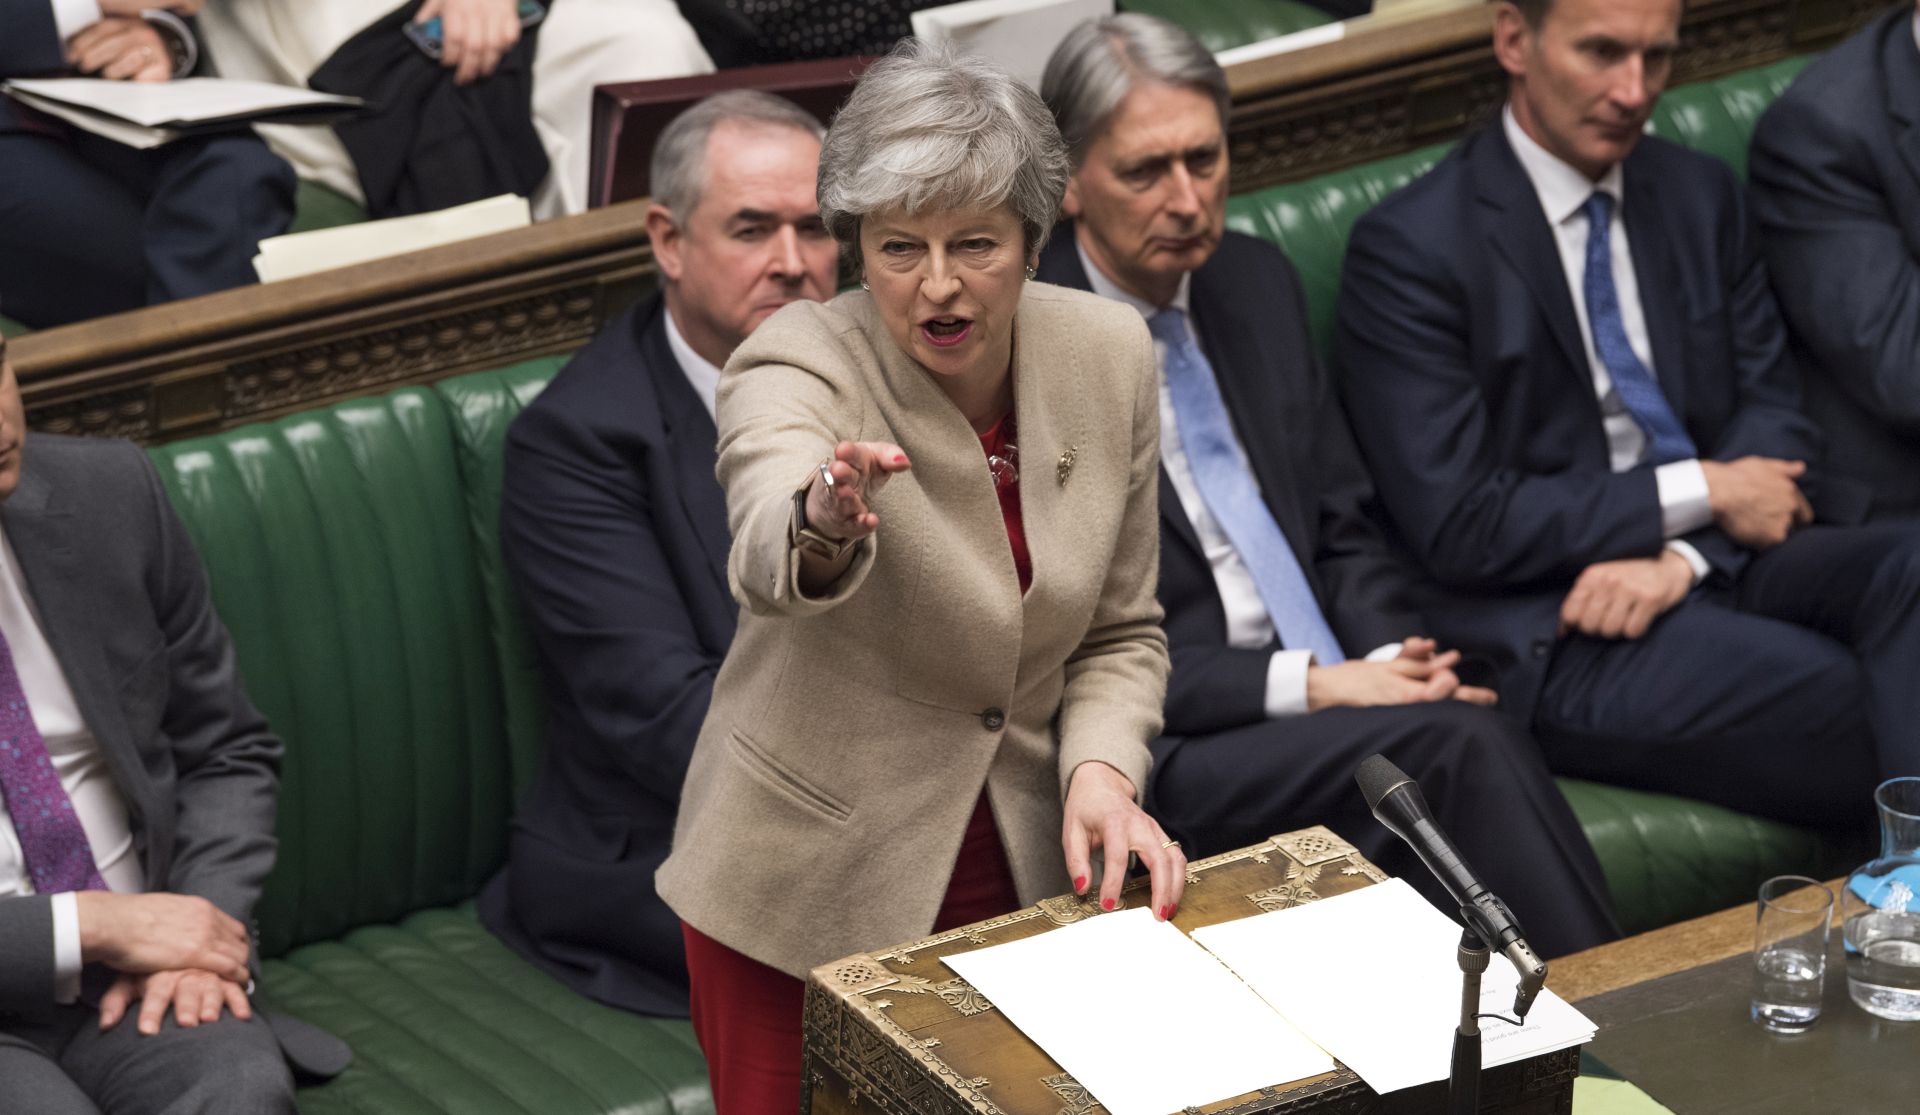 epa07471540 A handout photo made available by by the UK Parliament shows British Prime Minister Theresa May making a statement on Brexit to the British House of Commons in London, Britain, 29 March 2019. MPs have rejected Theresa May’s EU withdrawal agreement on the day the UK was due to leave the EU. The government lost by 344 votes to 286, a margin of 58.  EPA/MARK DUFFY / UK PARLIAMENT / HANDOUT MANDATORY CREDIT: UK PARLIAMENT JESSICA TAYLOR HANDOUT EDITORIAL USE ONLY/NO SALES